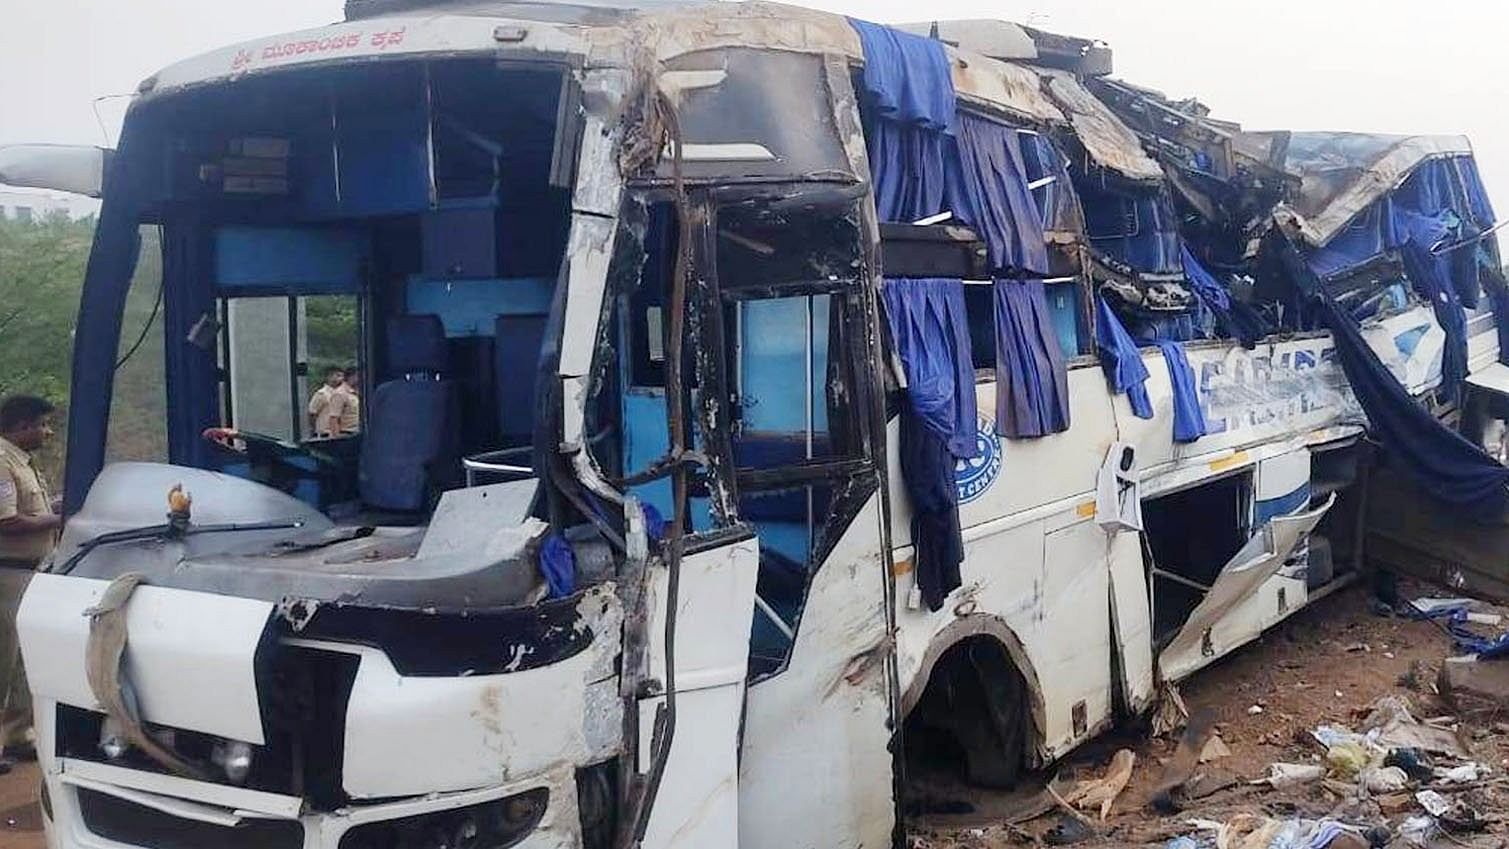 The private bus that was involved in an accident near Hanumanth Devara Kanive on the outskirts of Holalkere in Chitradurga district on Sunday.